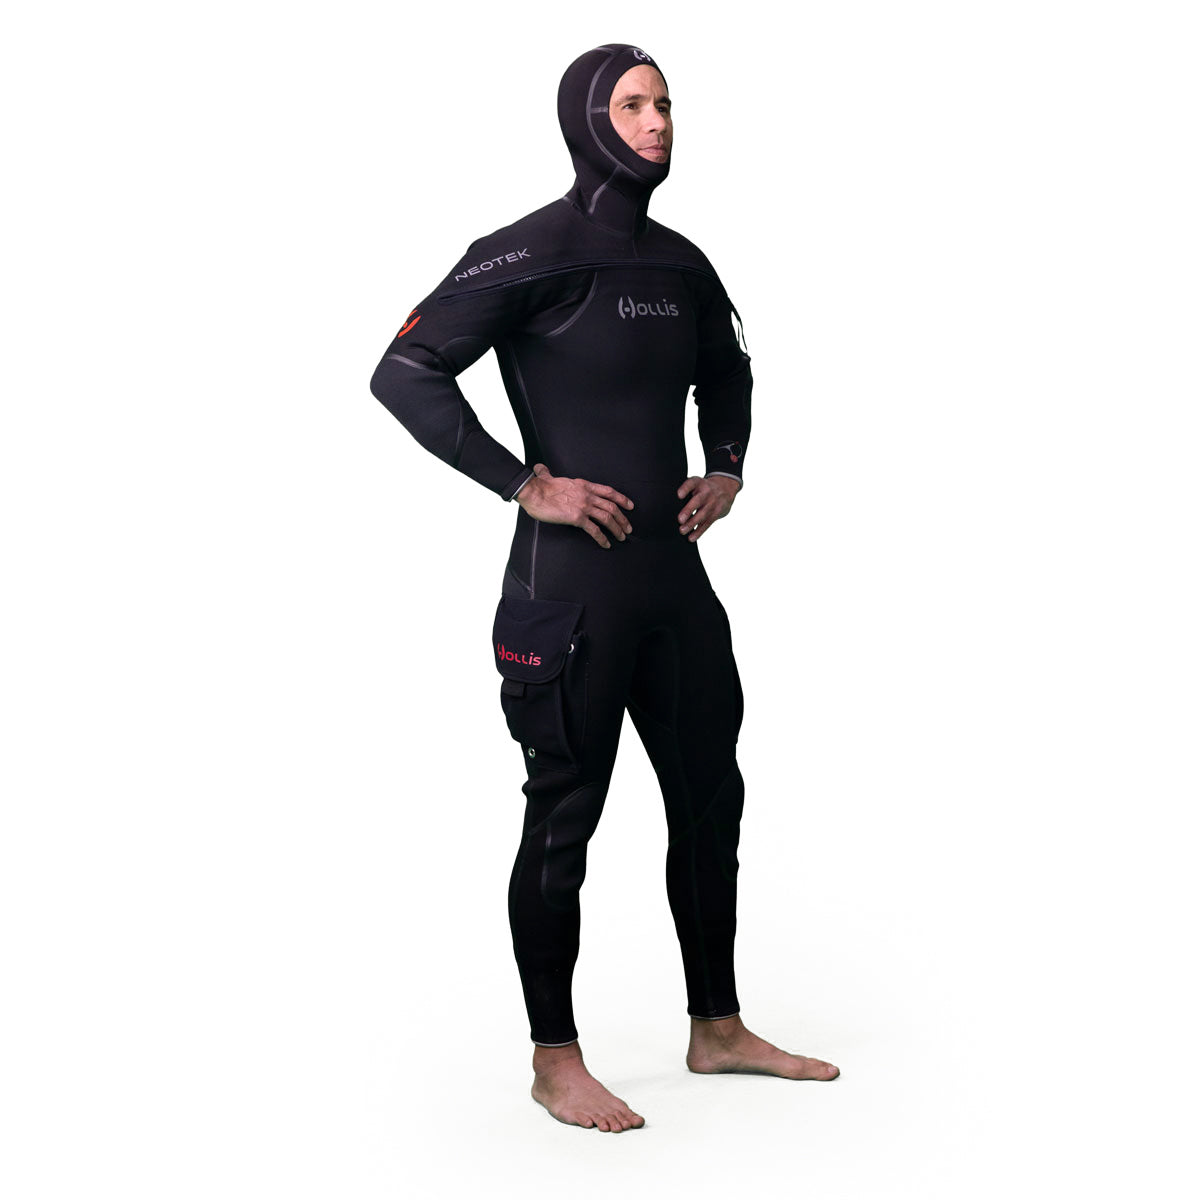 Spearfishing Wetsuits - Wetsuits - Exposure Protection - All Products